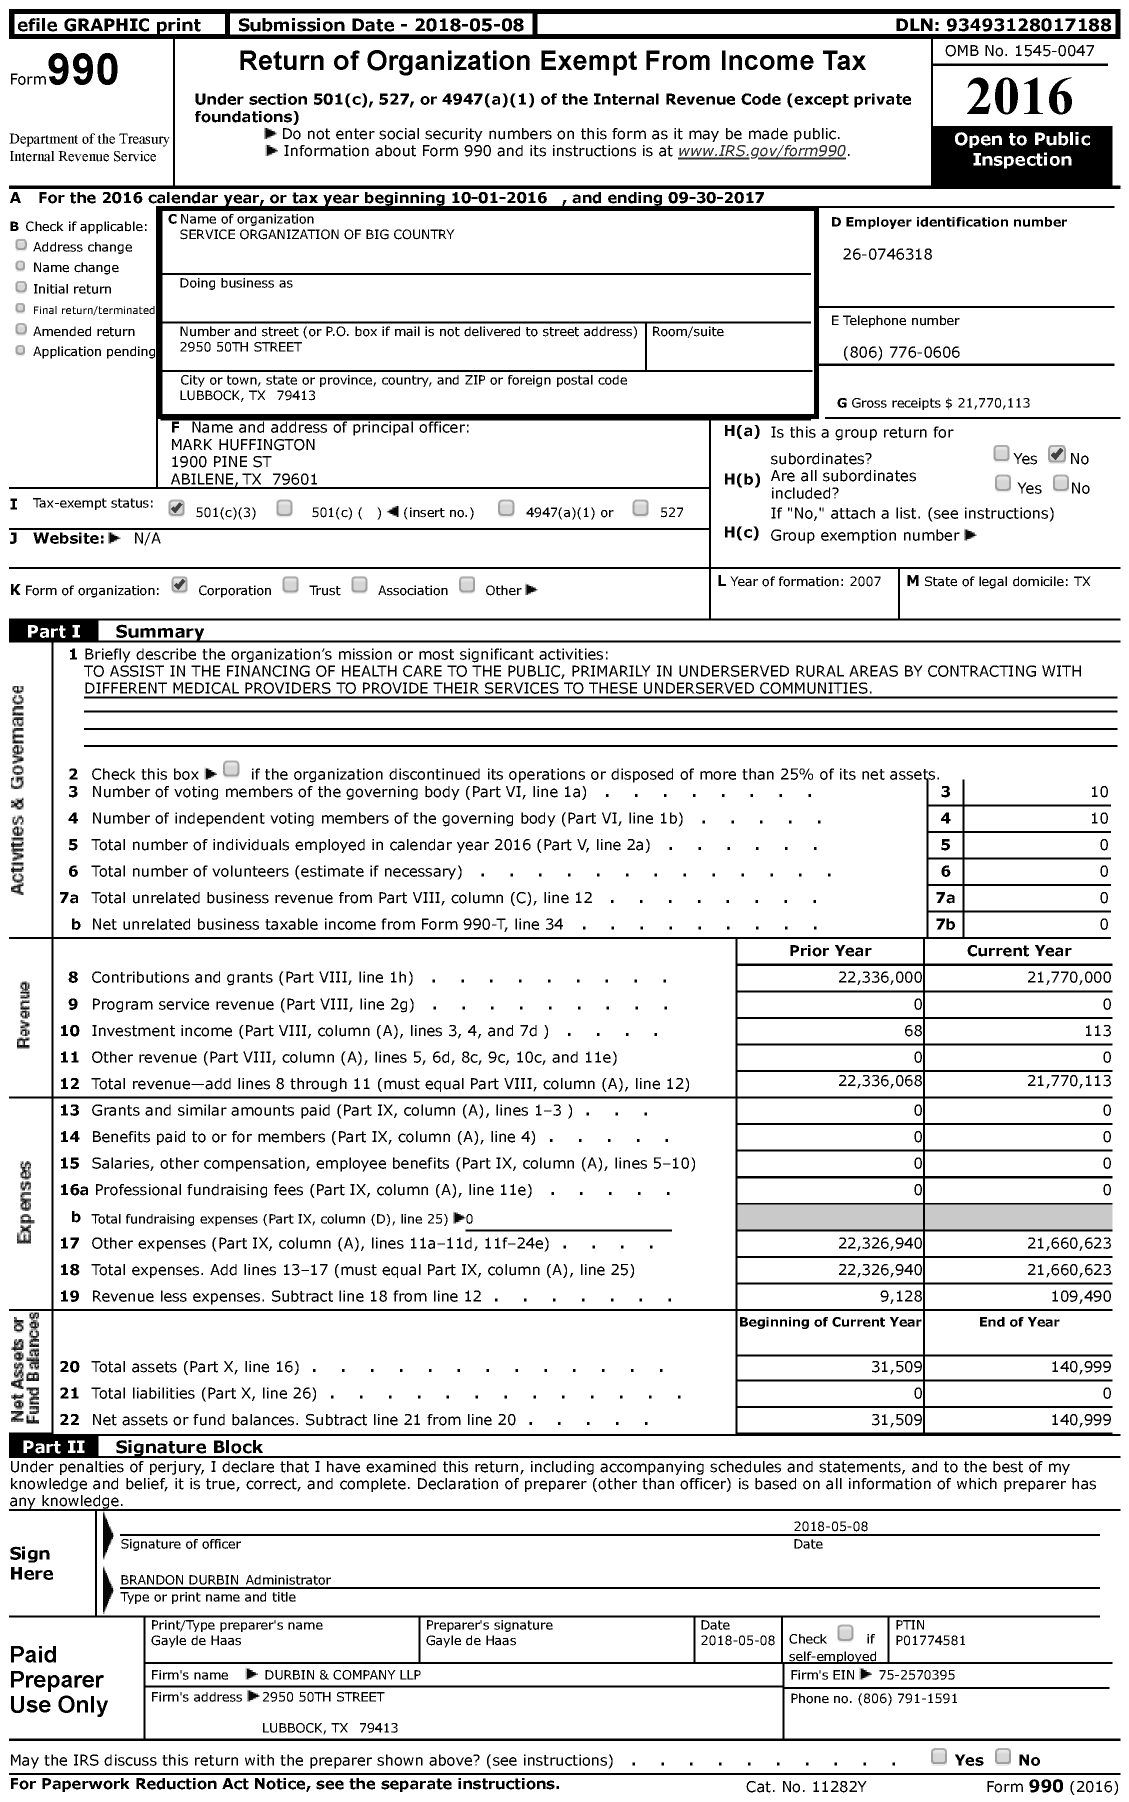 Image of first page of 2016 Form 990 for Service Organization of Big Country